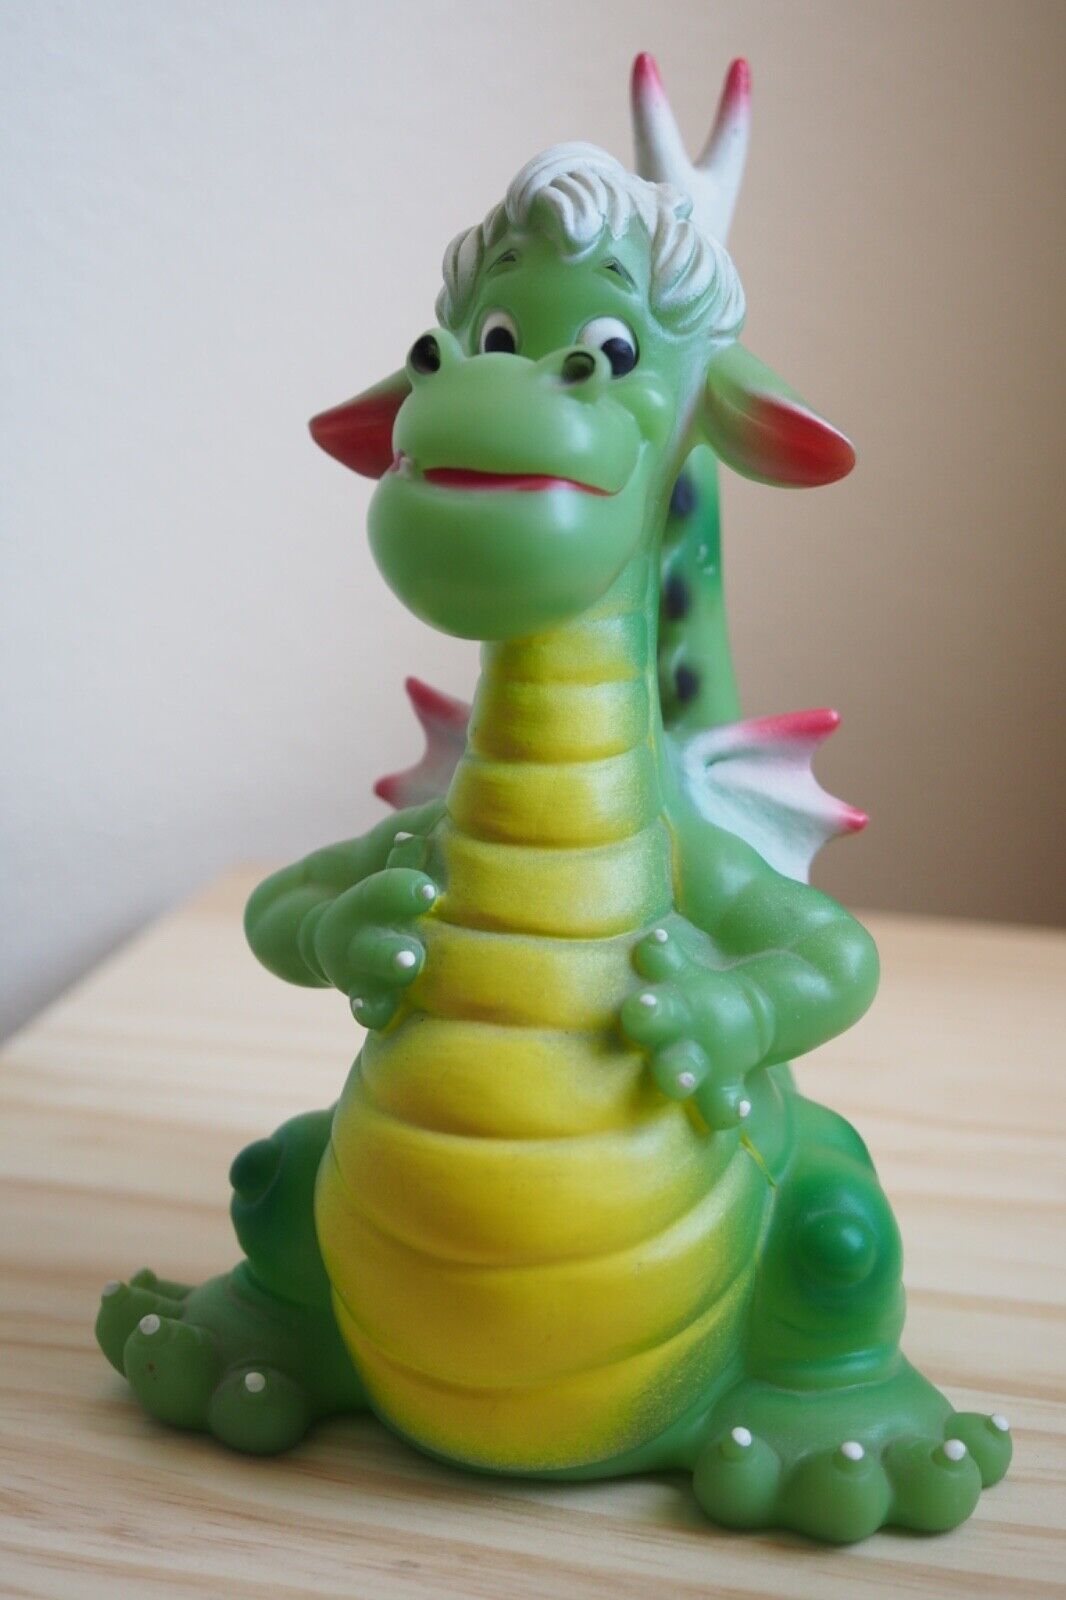 Vintage 1970s 1977 Walt Disney Pete's Dragon Elliot Rubber Toy Made in Italy